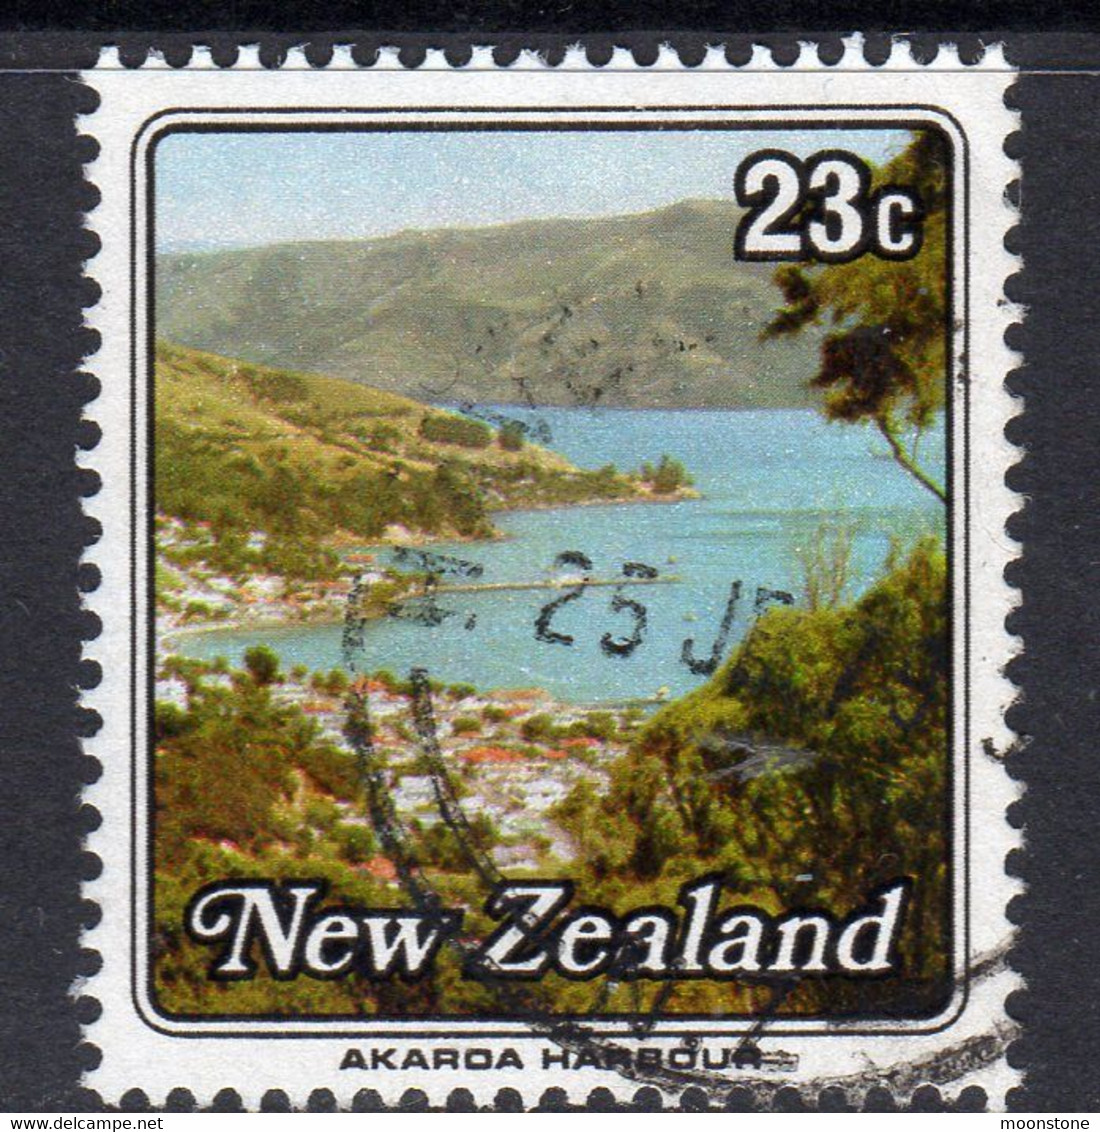 New Zealand 1979 Small Harbours 23c Value, Used, SG 1194 (A) - Oblitérés